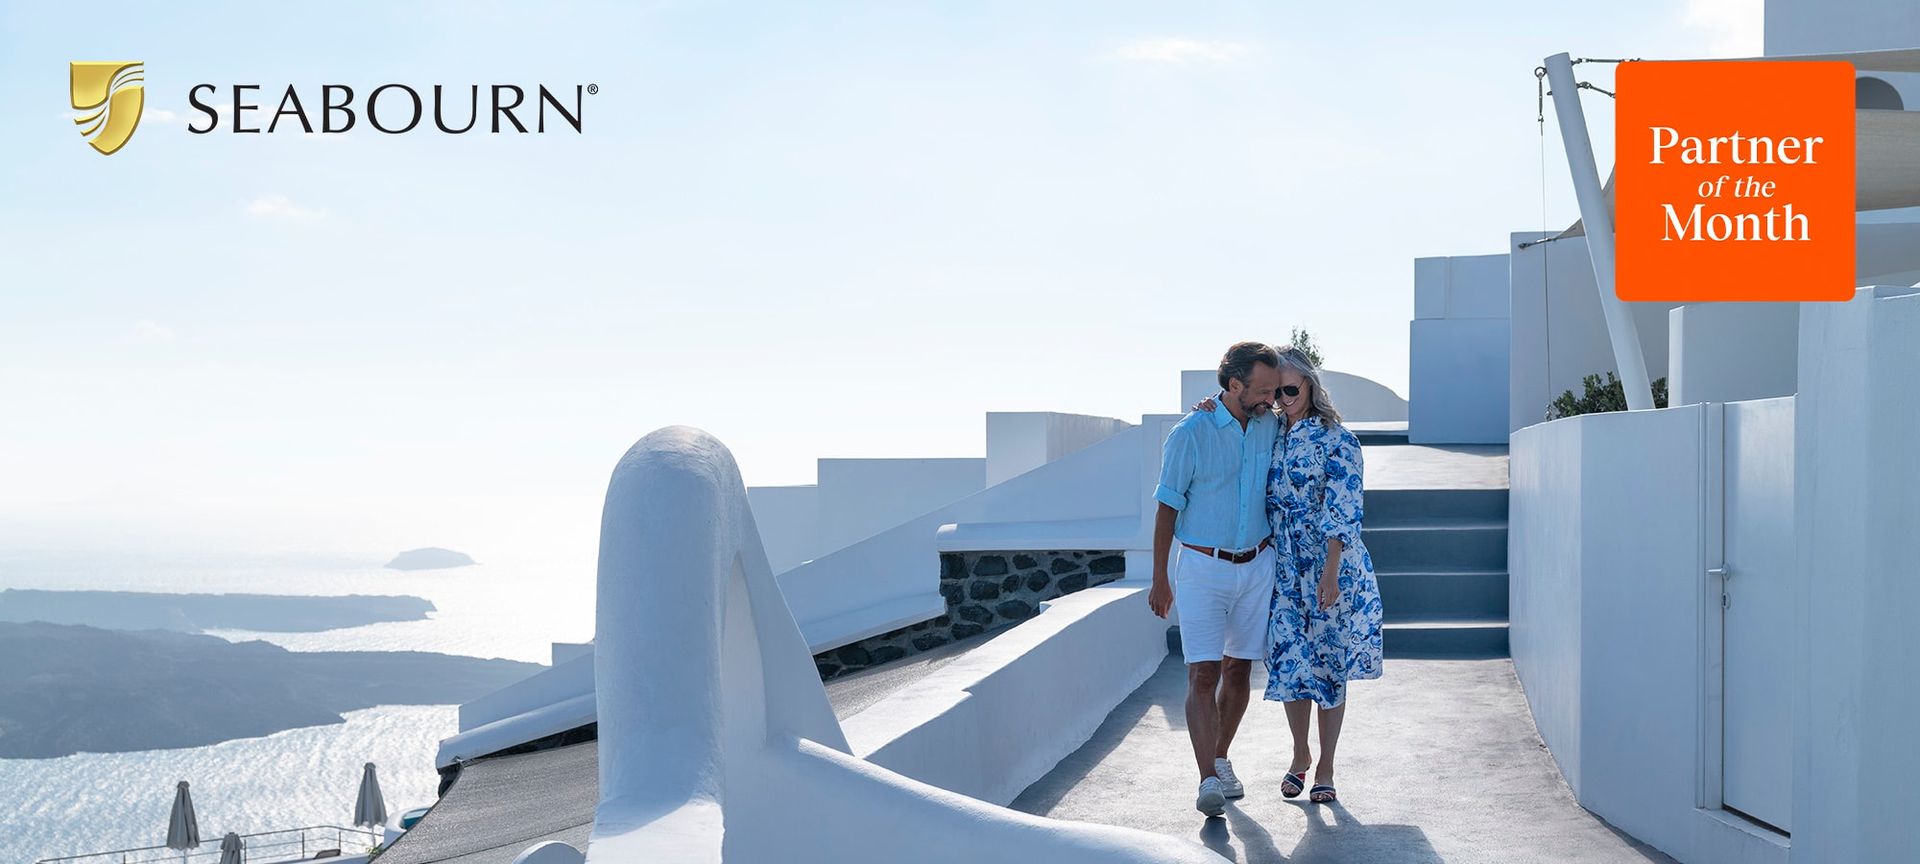 A man and a woman are walking down a sidewalk with a seabourn logo in the background